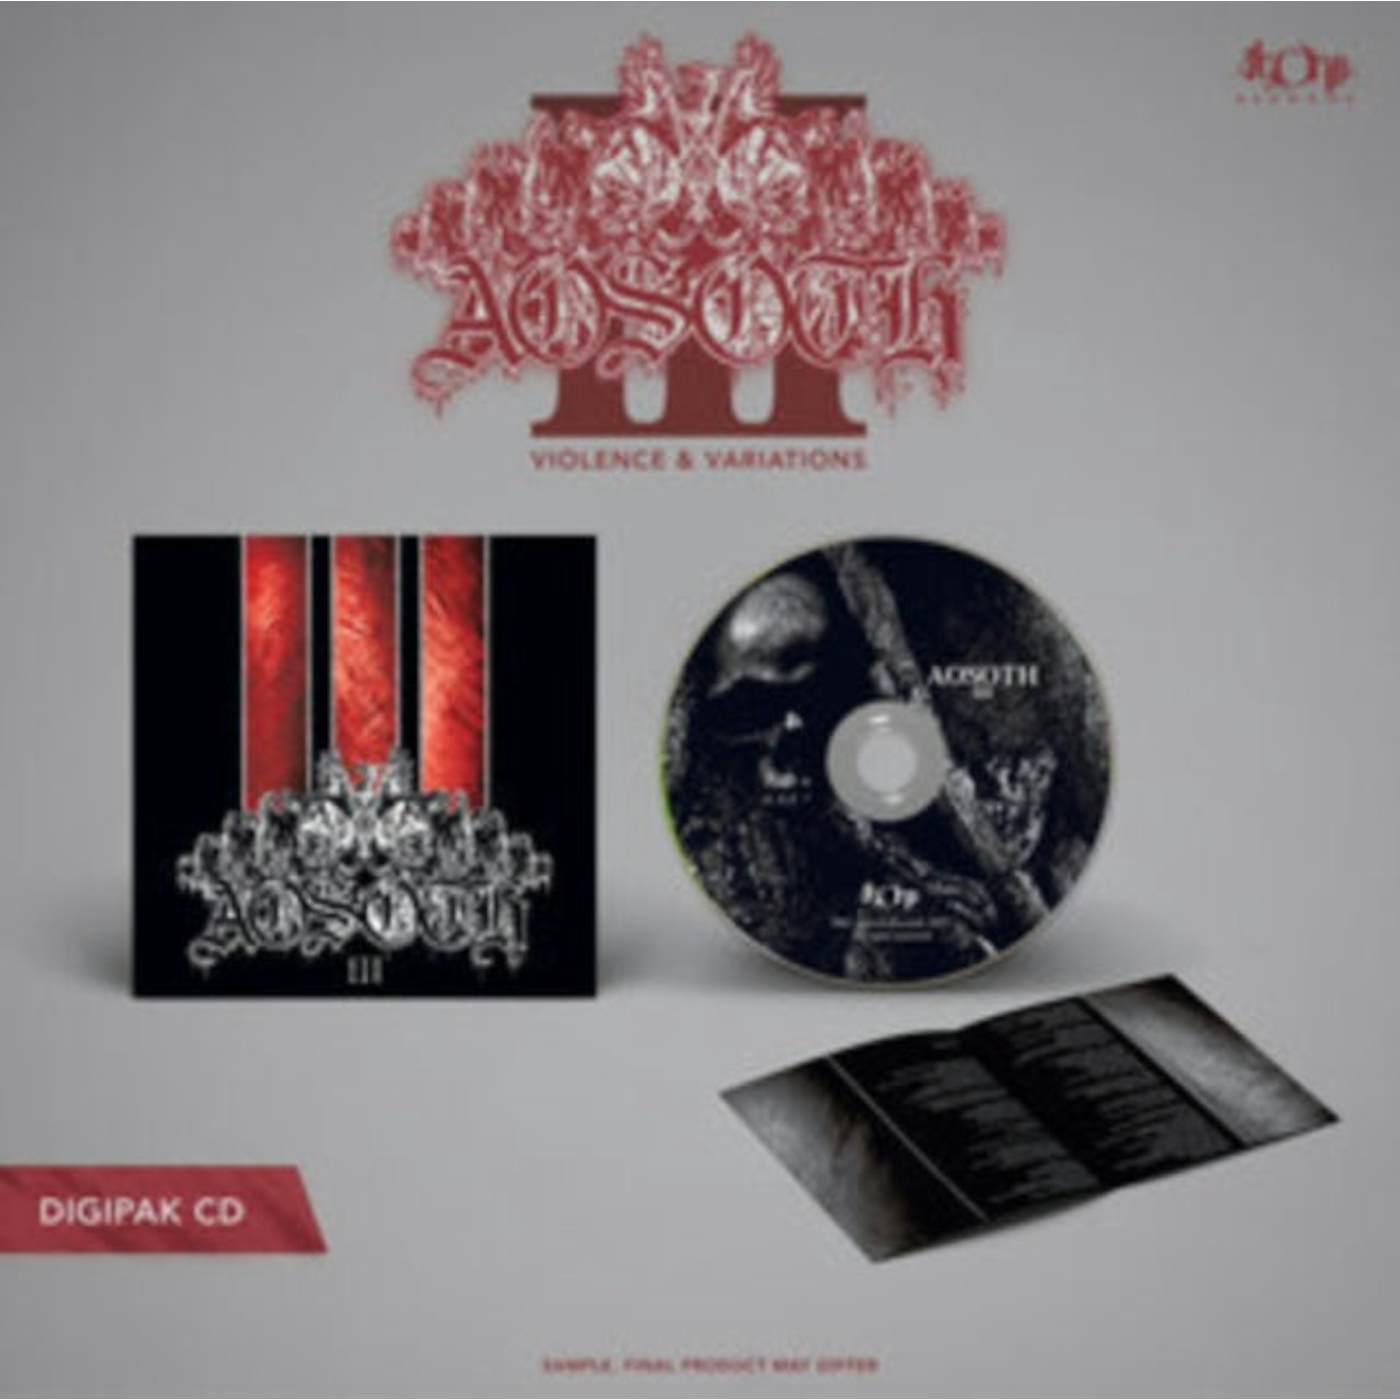 Aosoth CD - Iii - Violence & Variations (Re-Issue)